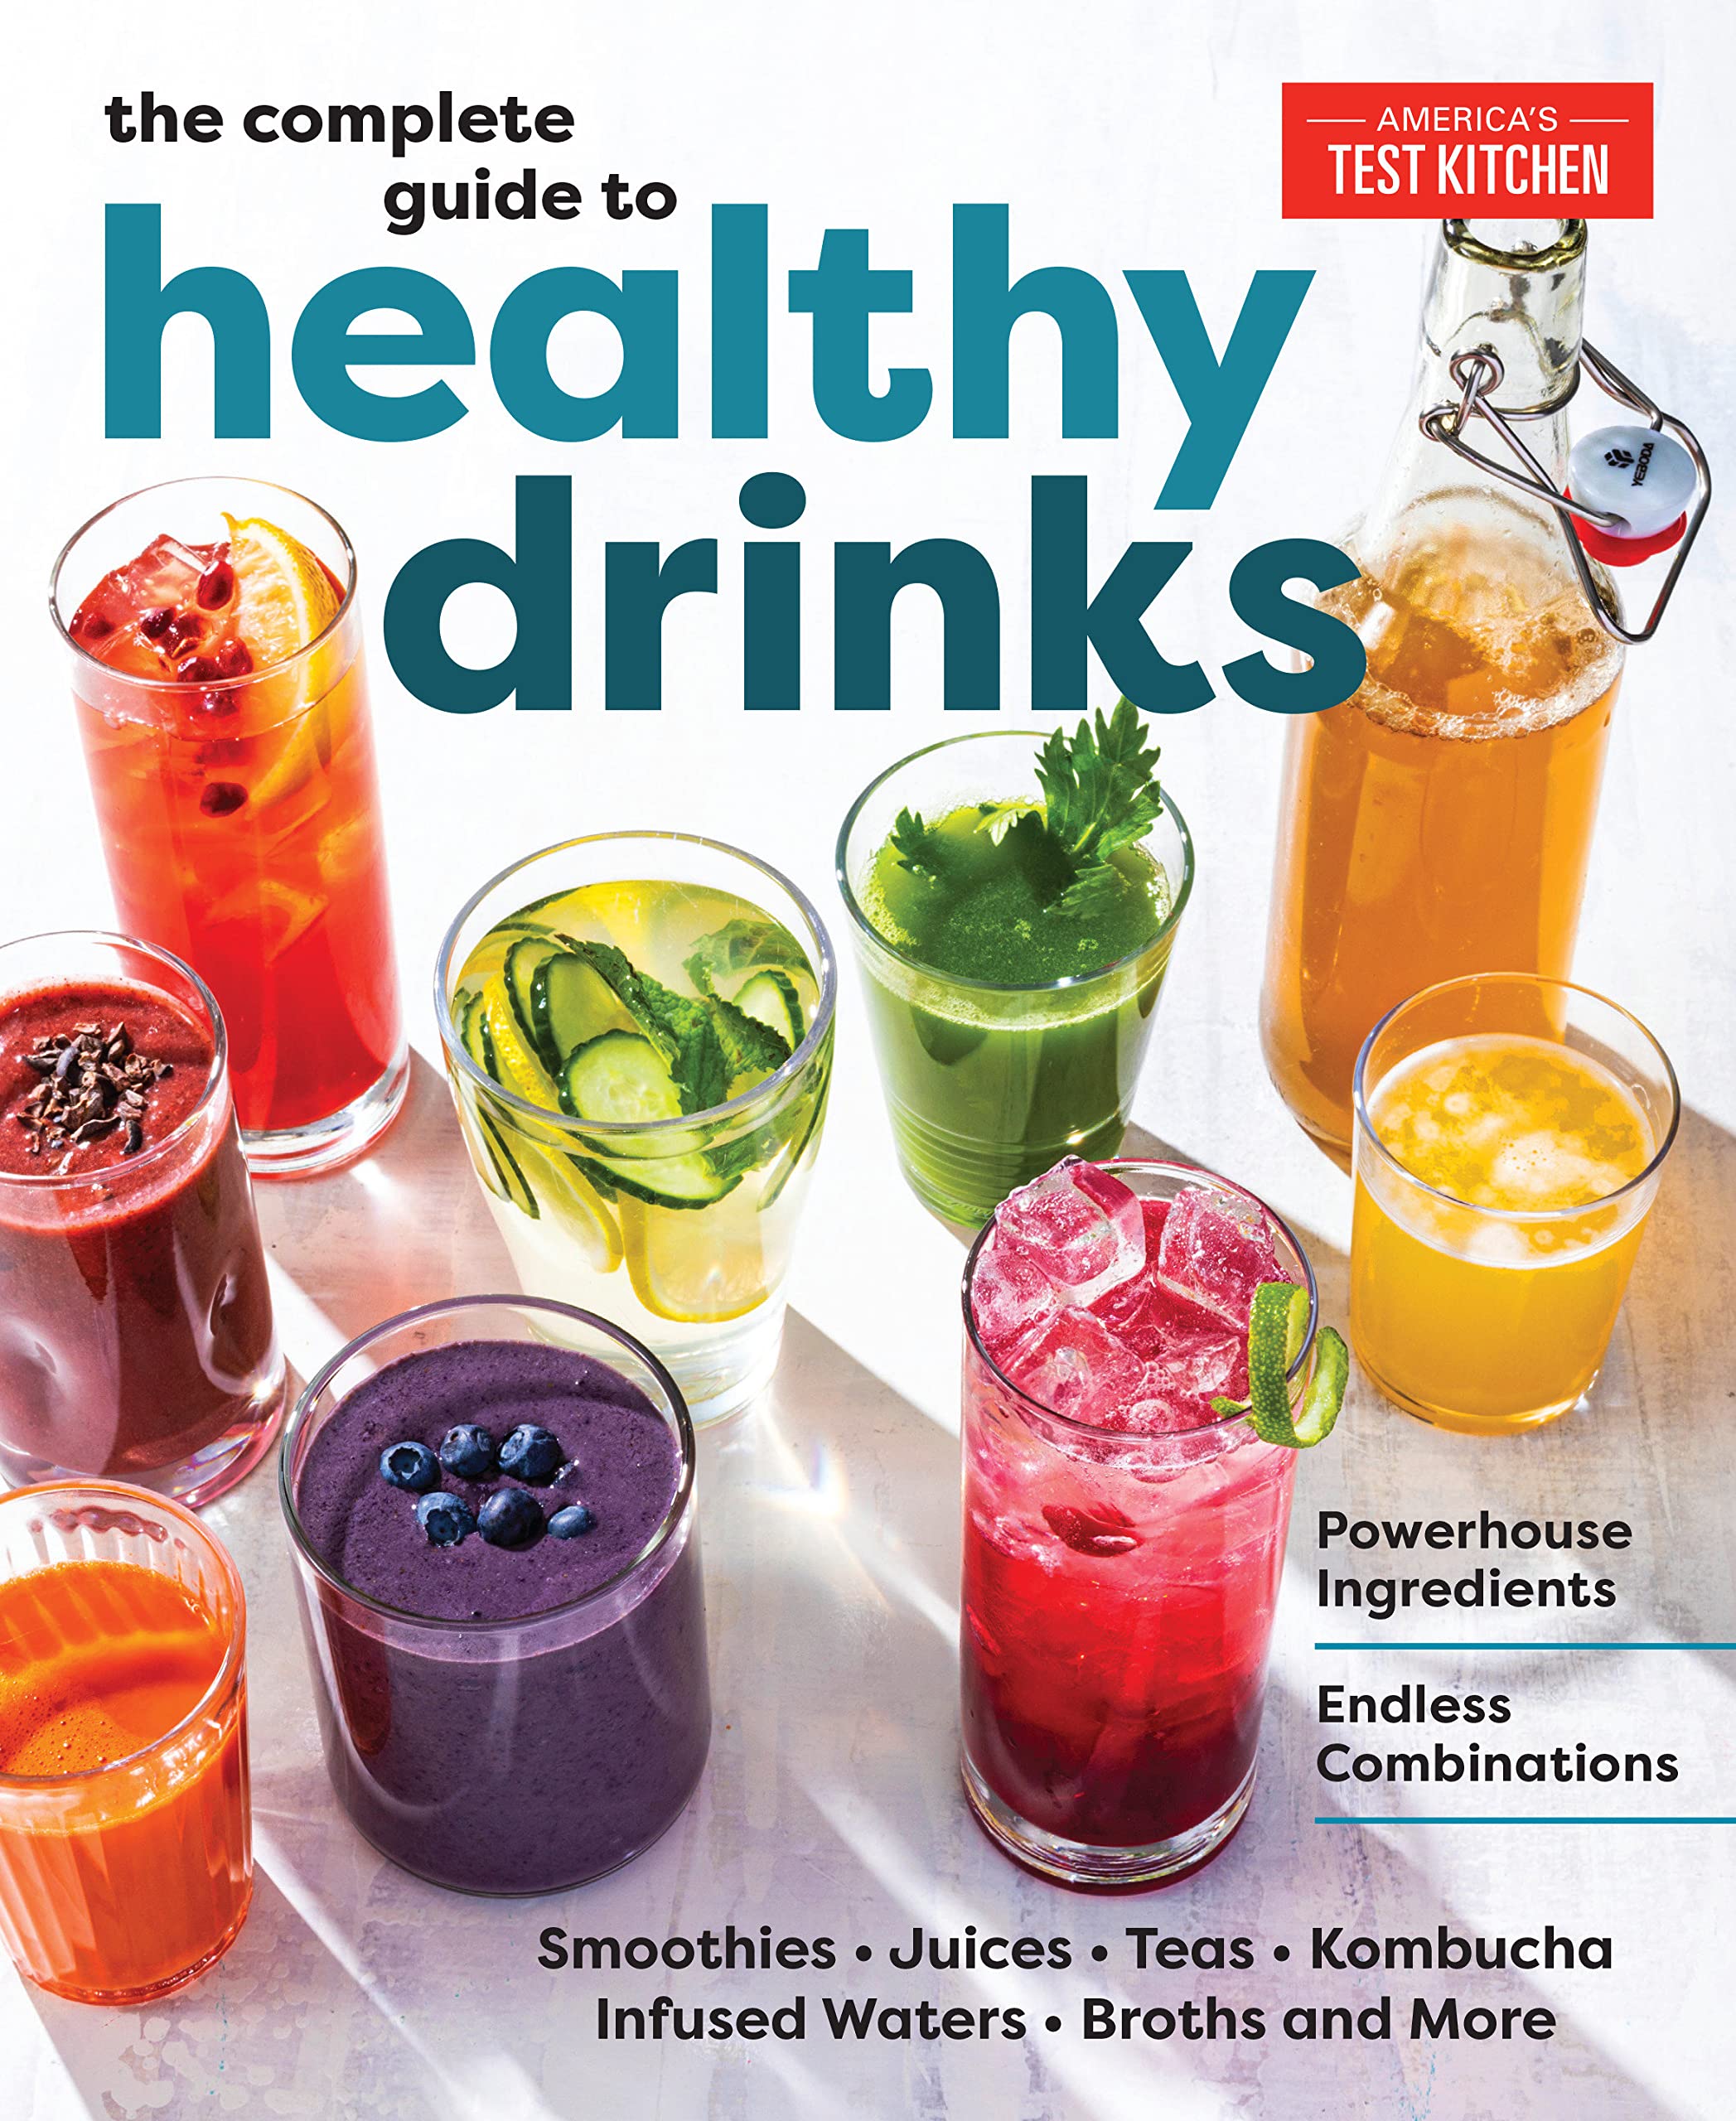 The Complete Guide to Healthy Drinks: Powerhouse Ingredients, Endless Combinations (America's Test Kitchen)